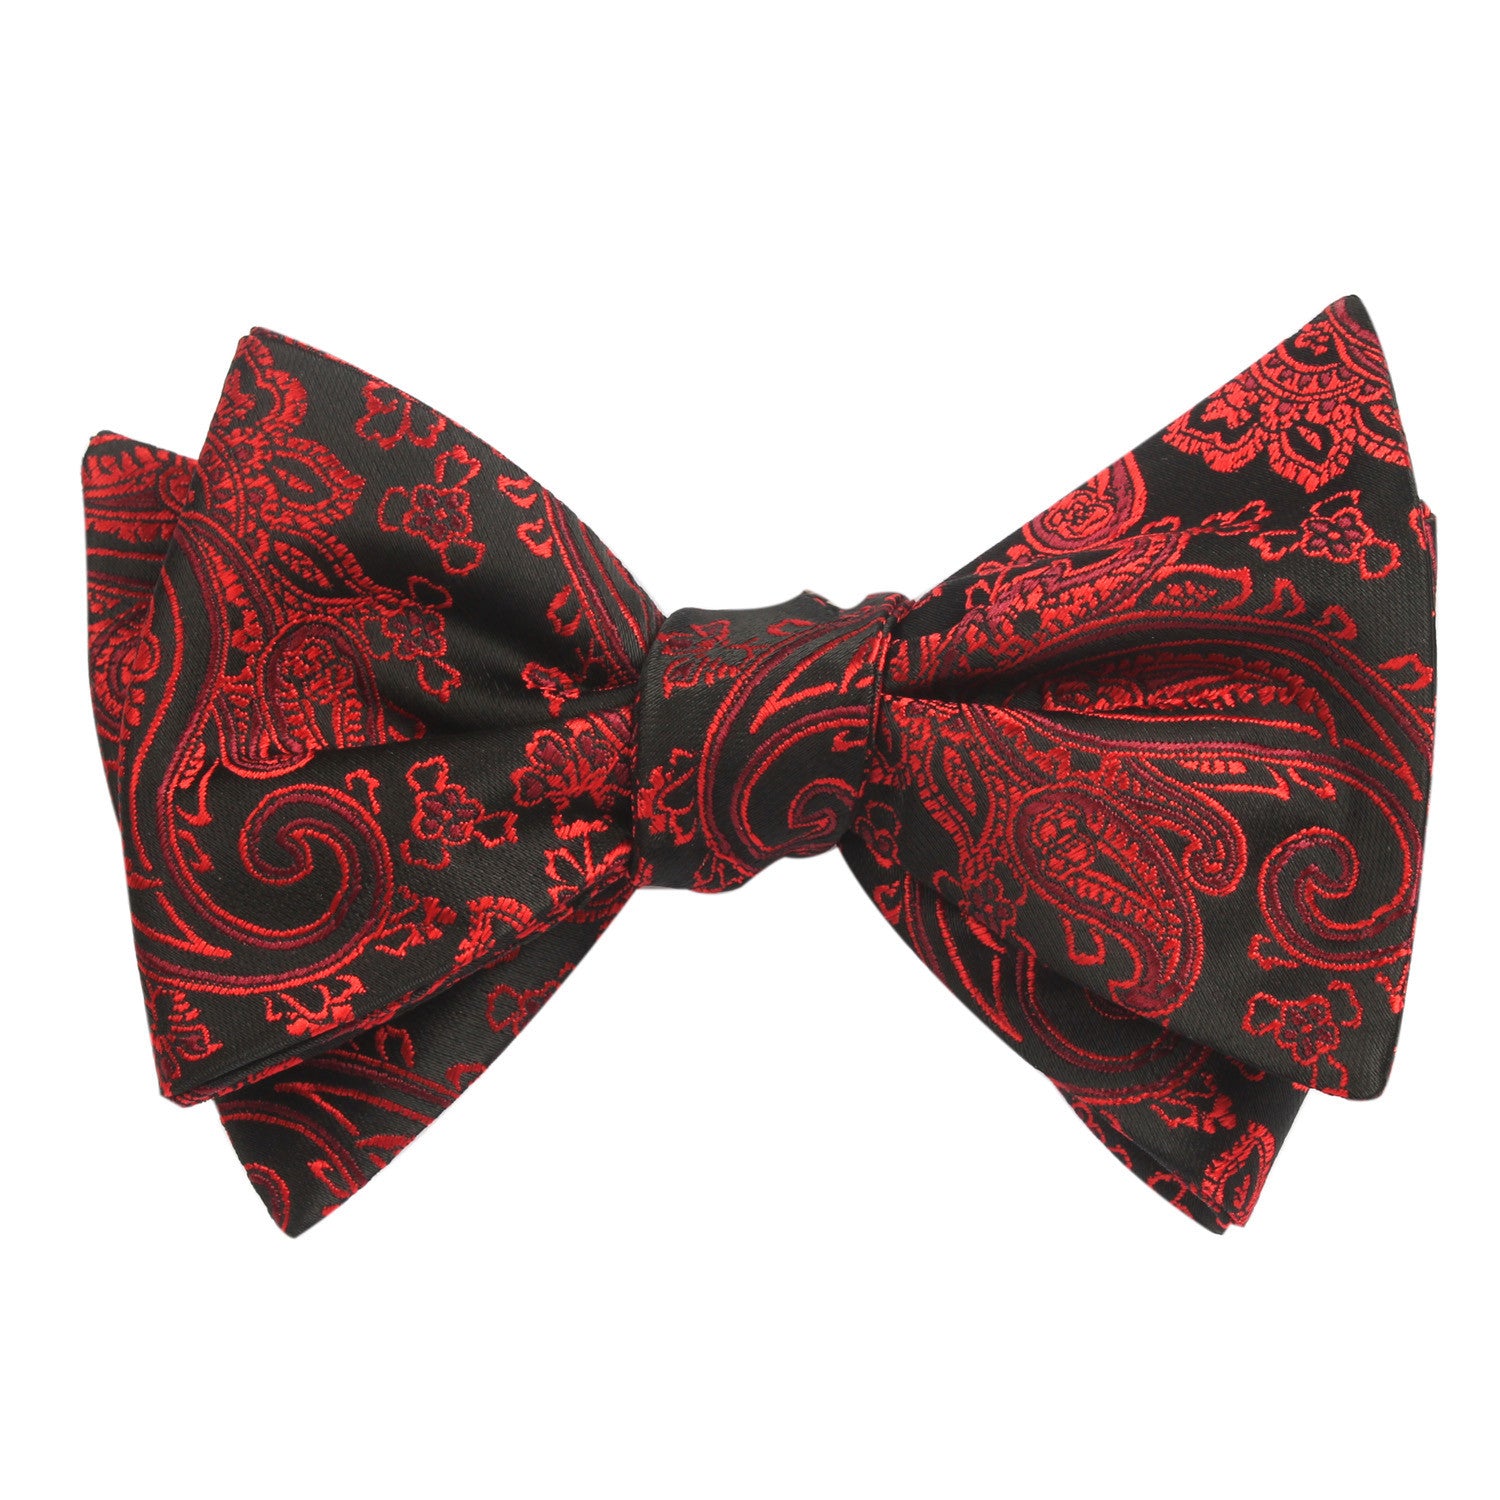 Paisley Red and Black Bow Tie Untied Self tied knot by OTAA